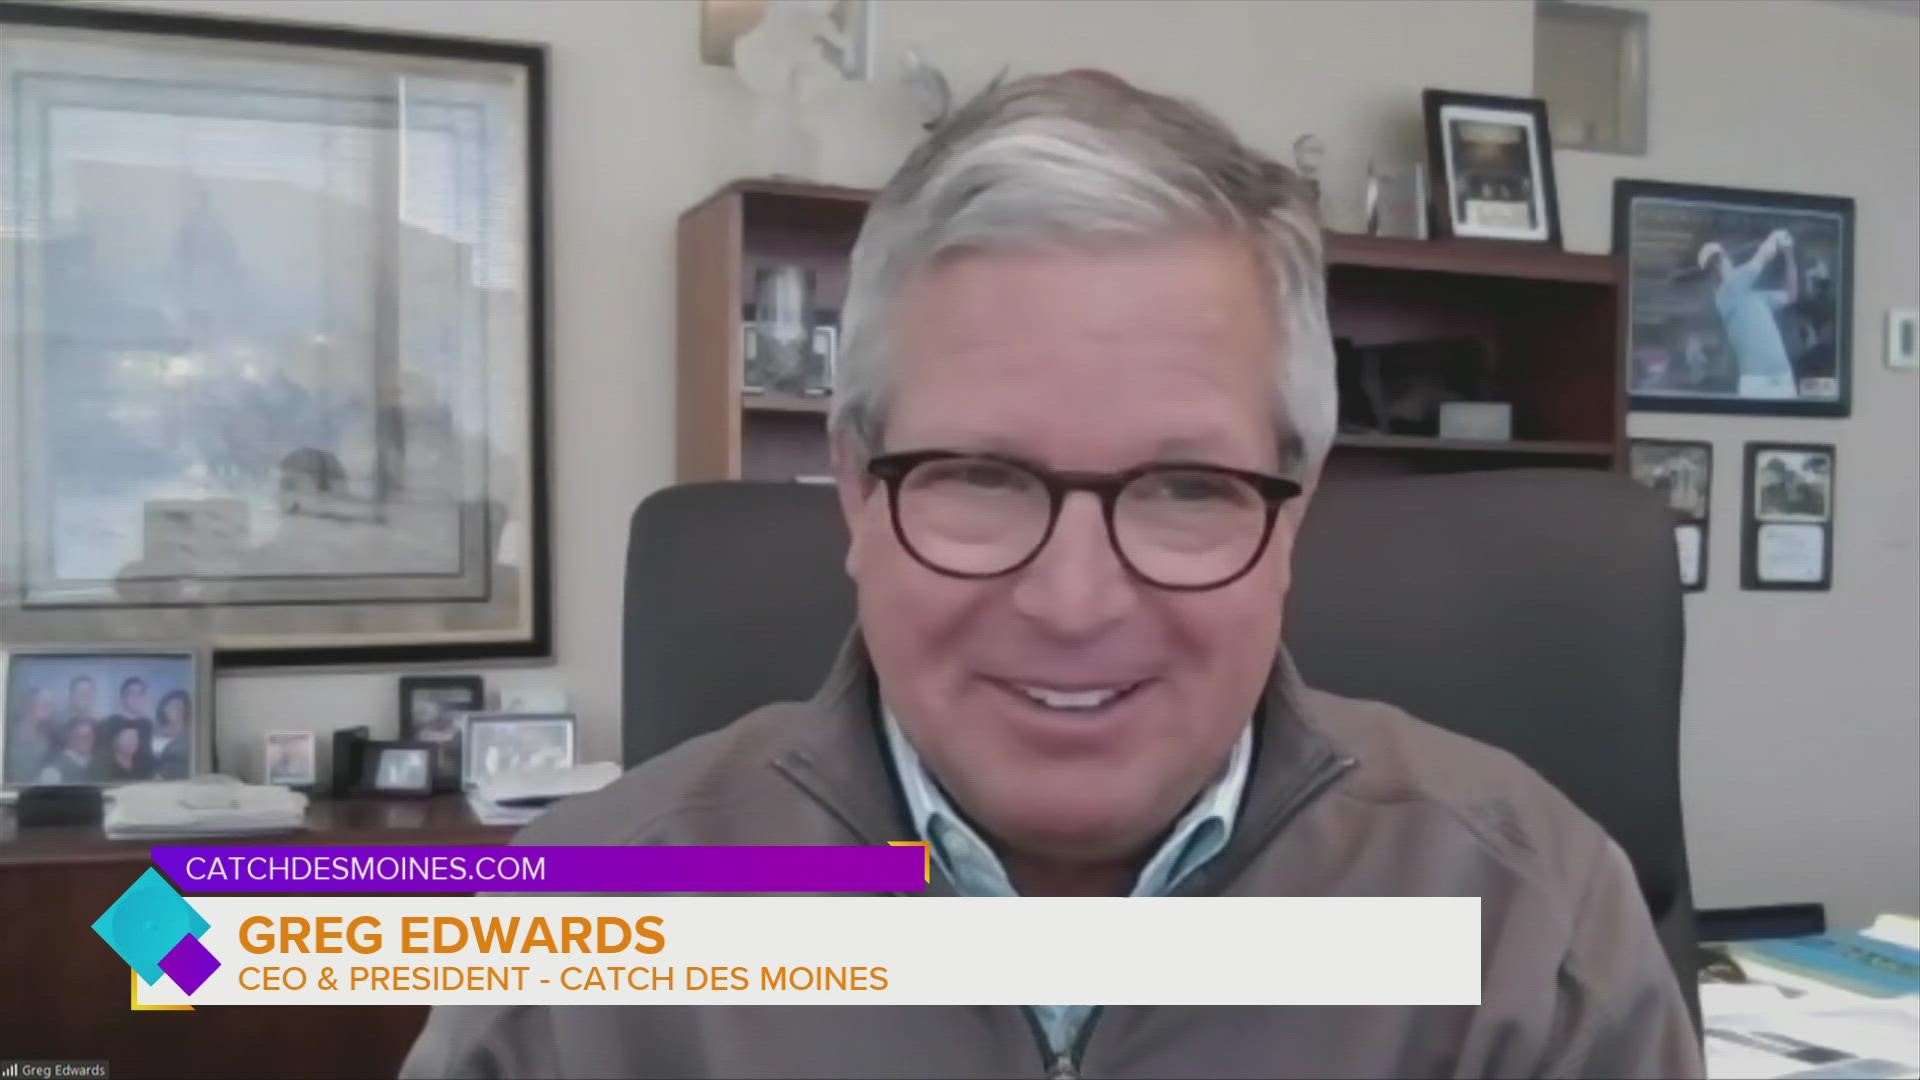 Catch Des Moines CEO/President Greg Edwards talks about great activities in the Des Moines Area this week including fun comedies, holiday shopping & basketball